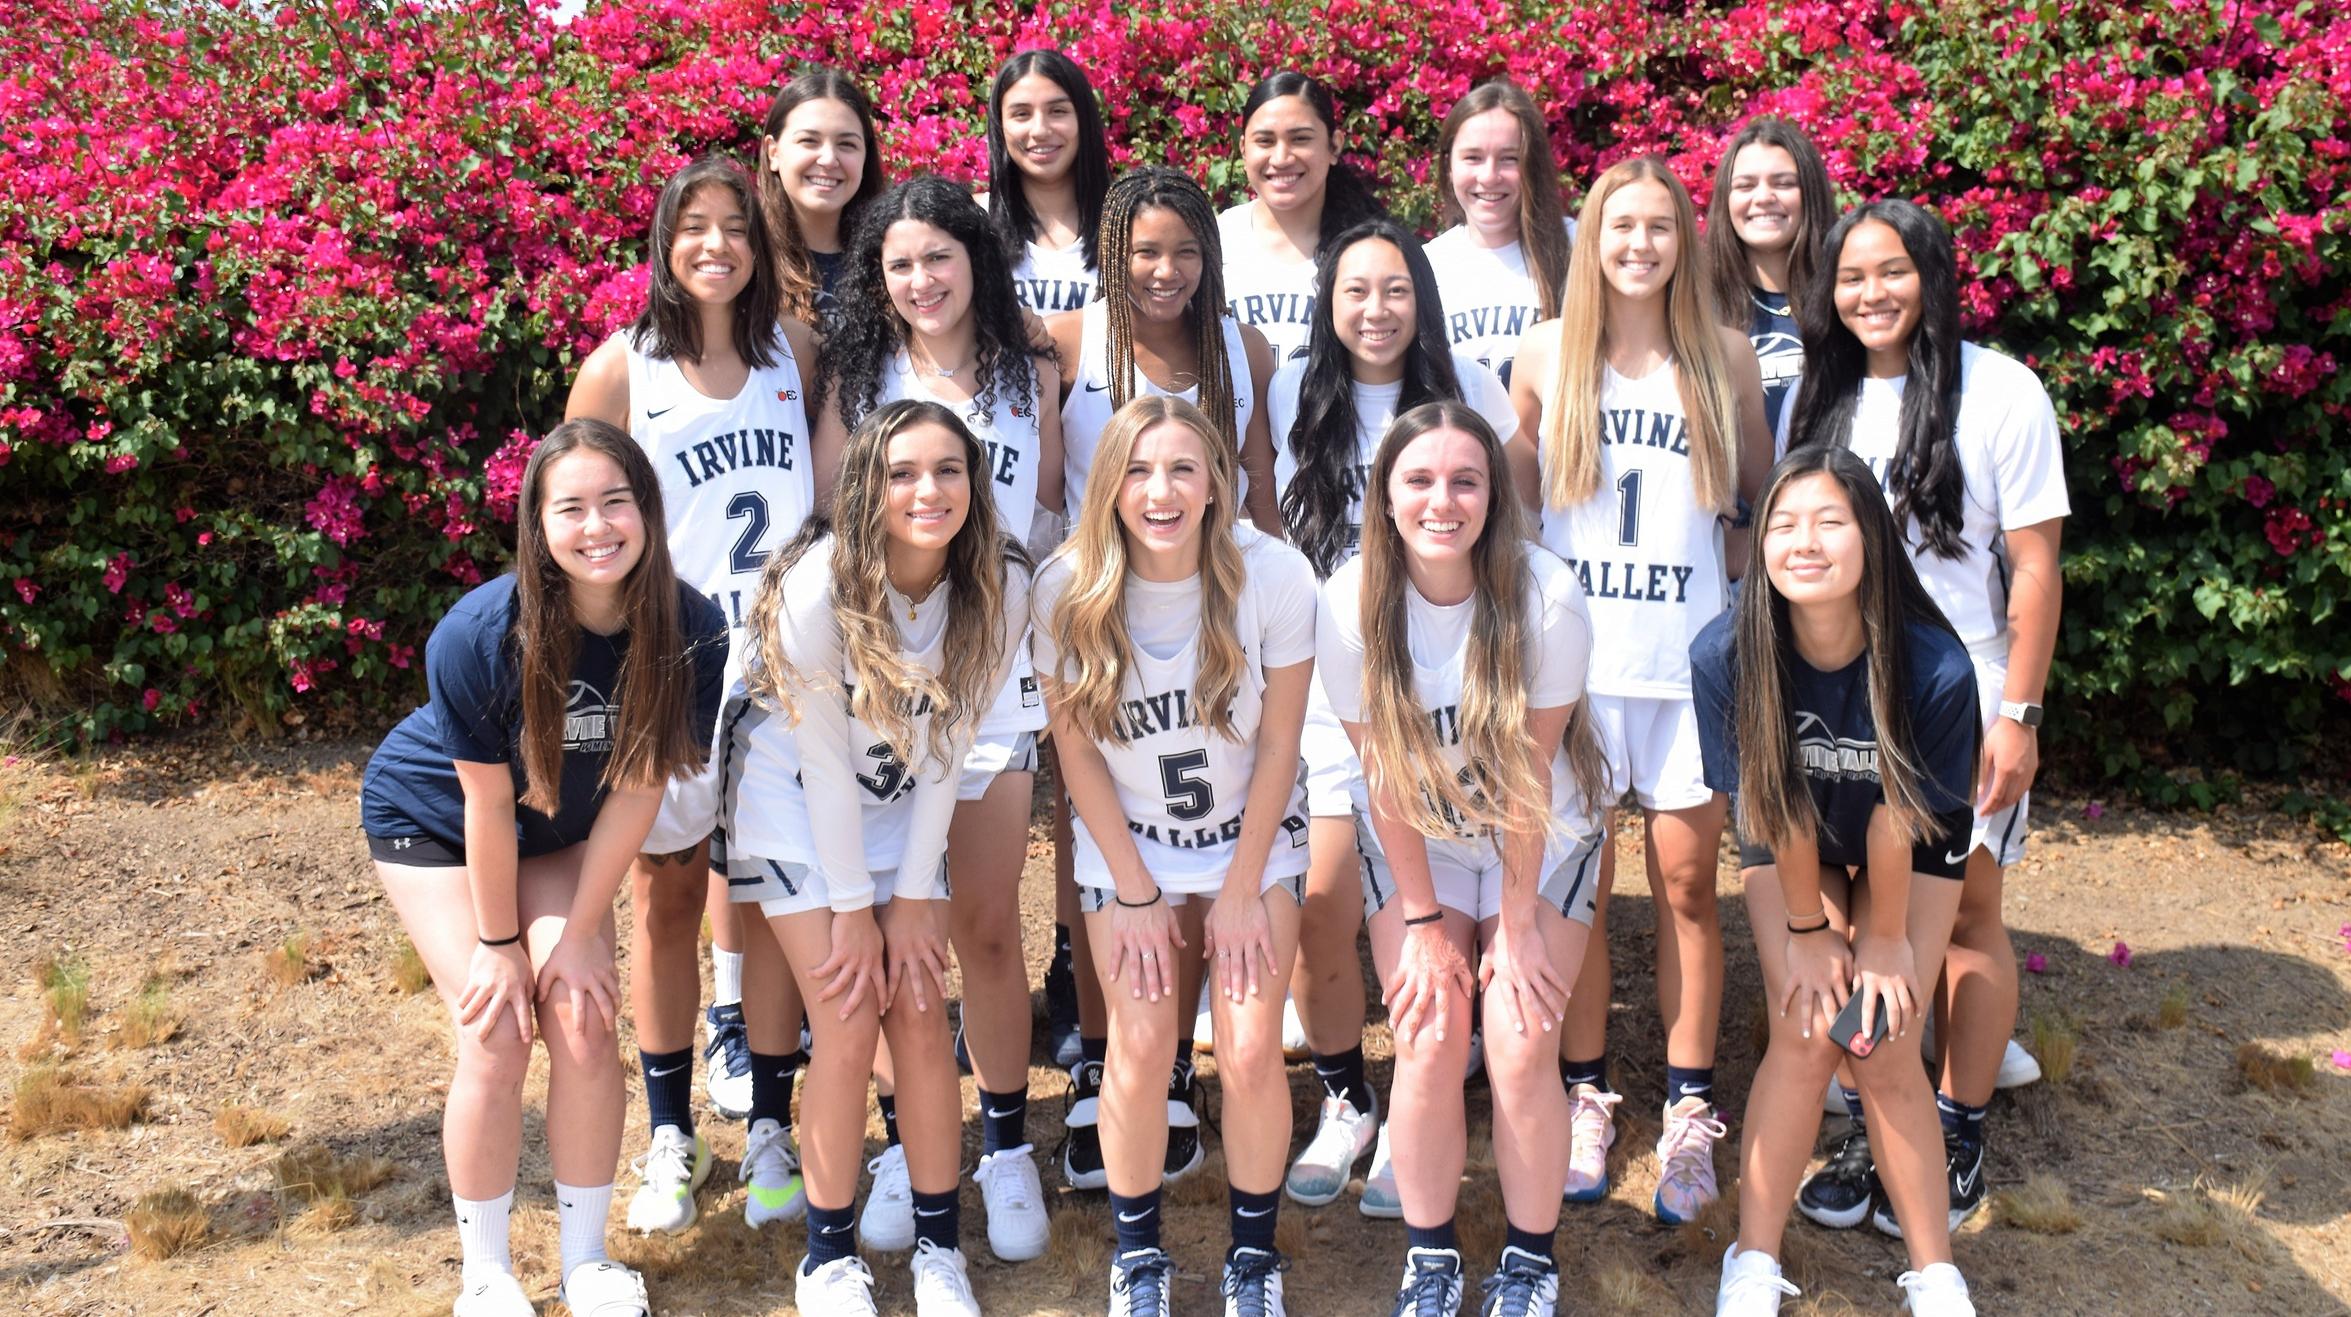 Women's basketball team ready to host Cerritos in 2nd round